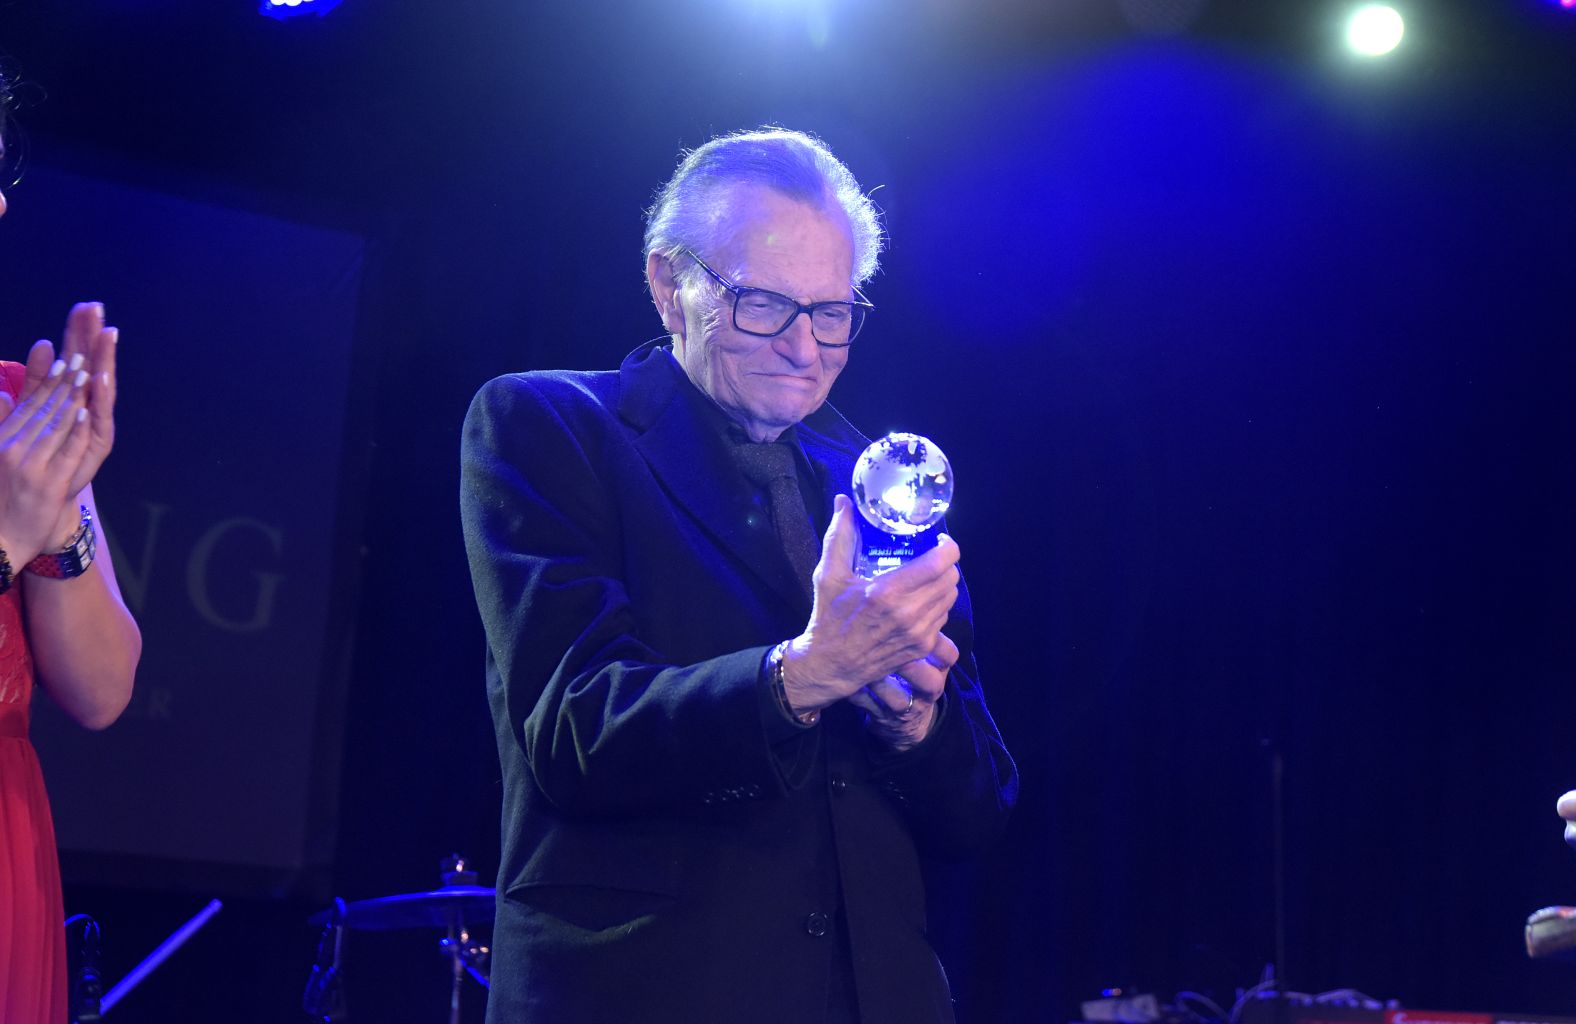 King receives a lifetime achievement award at The Soiree gala in 2019.